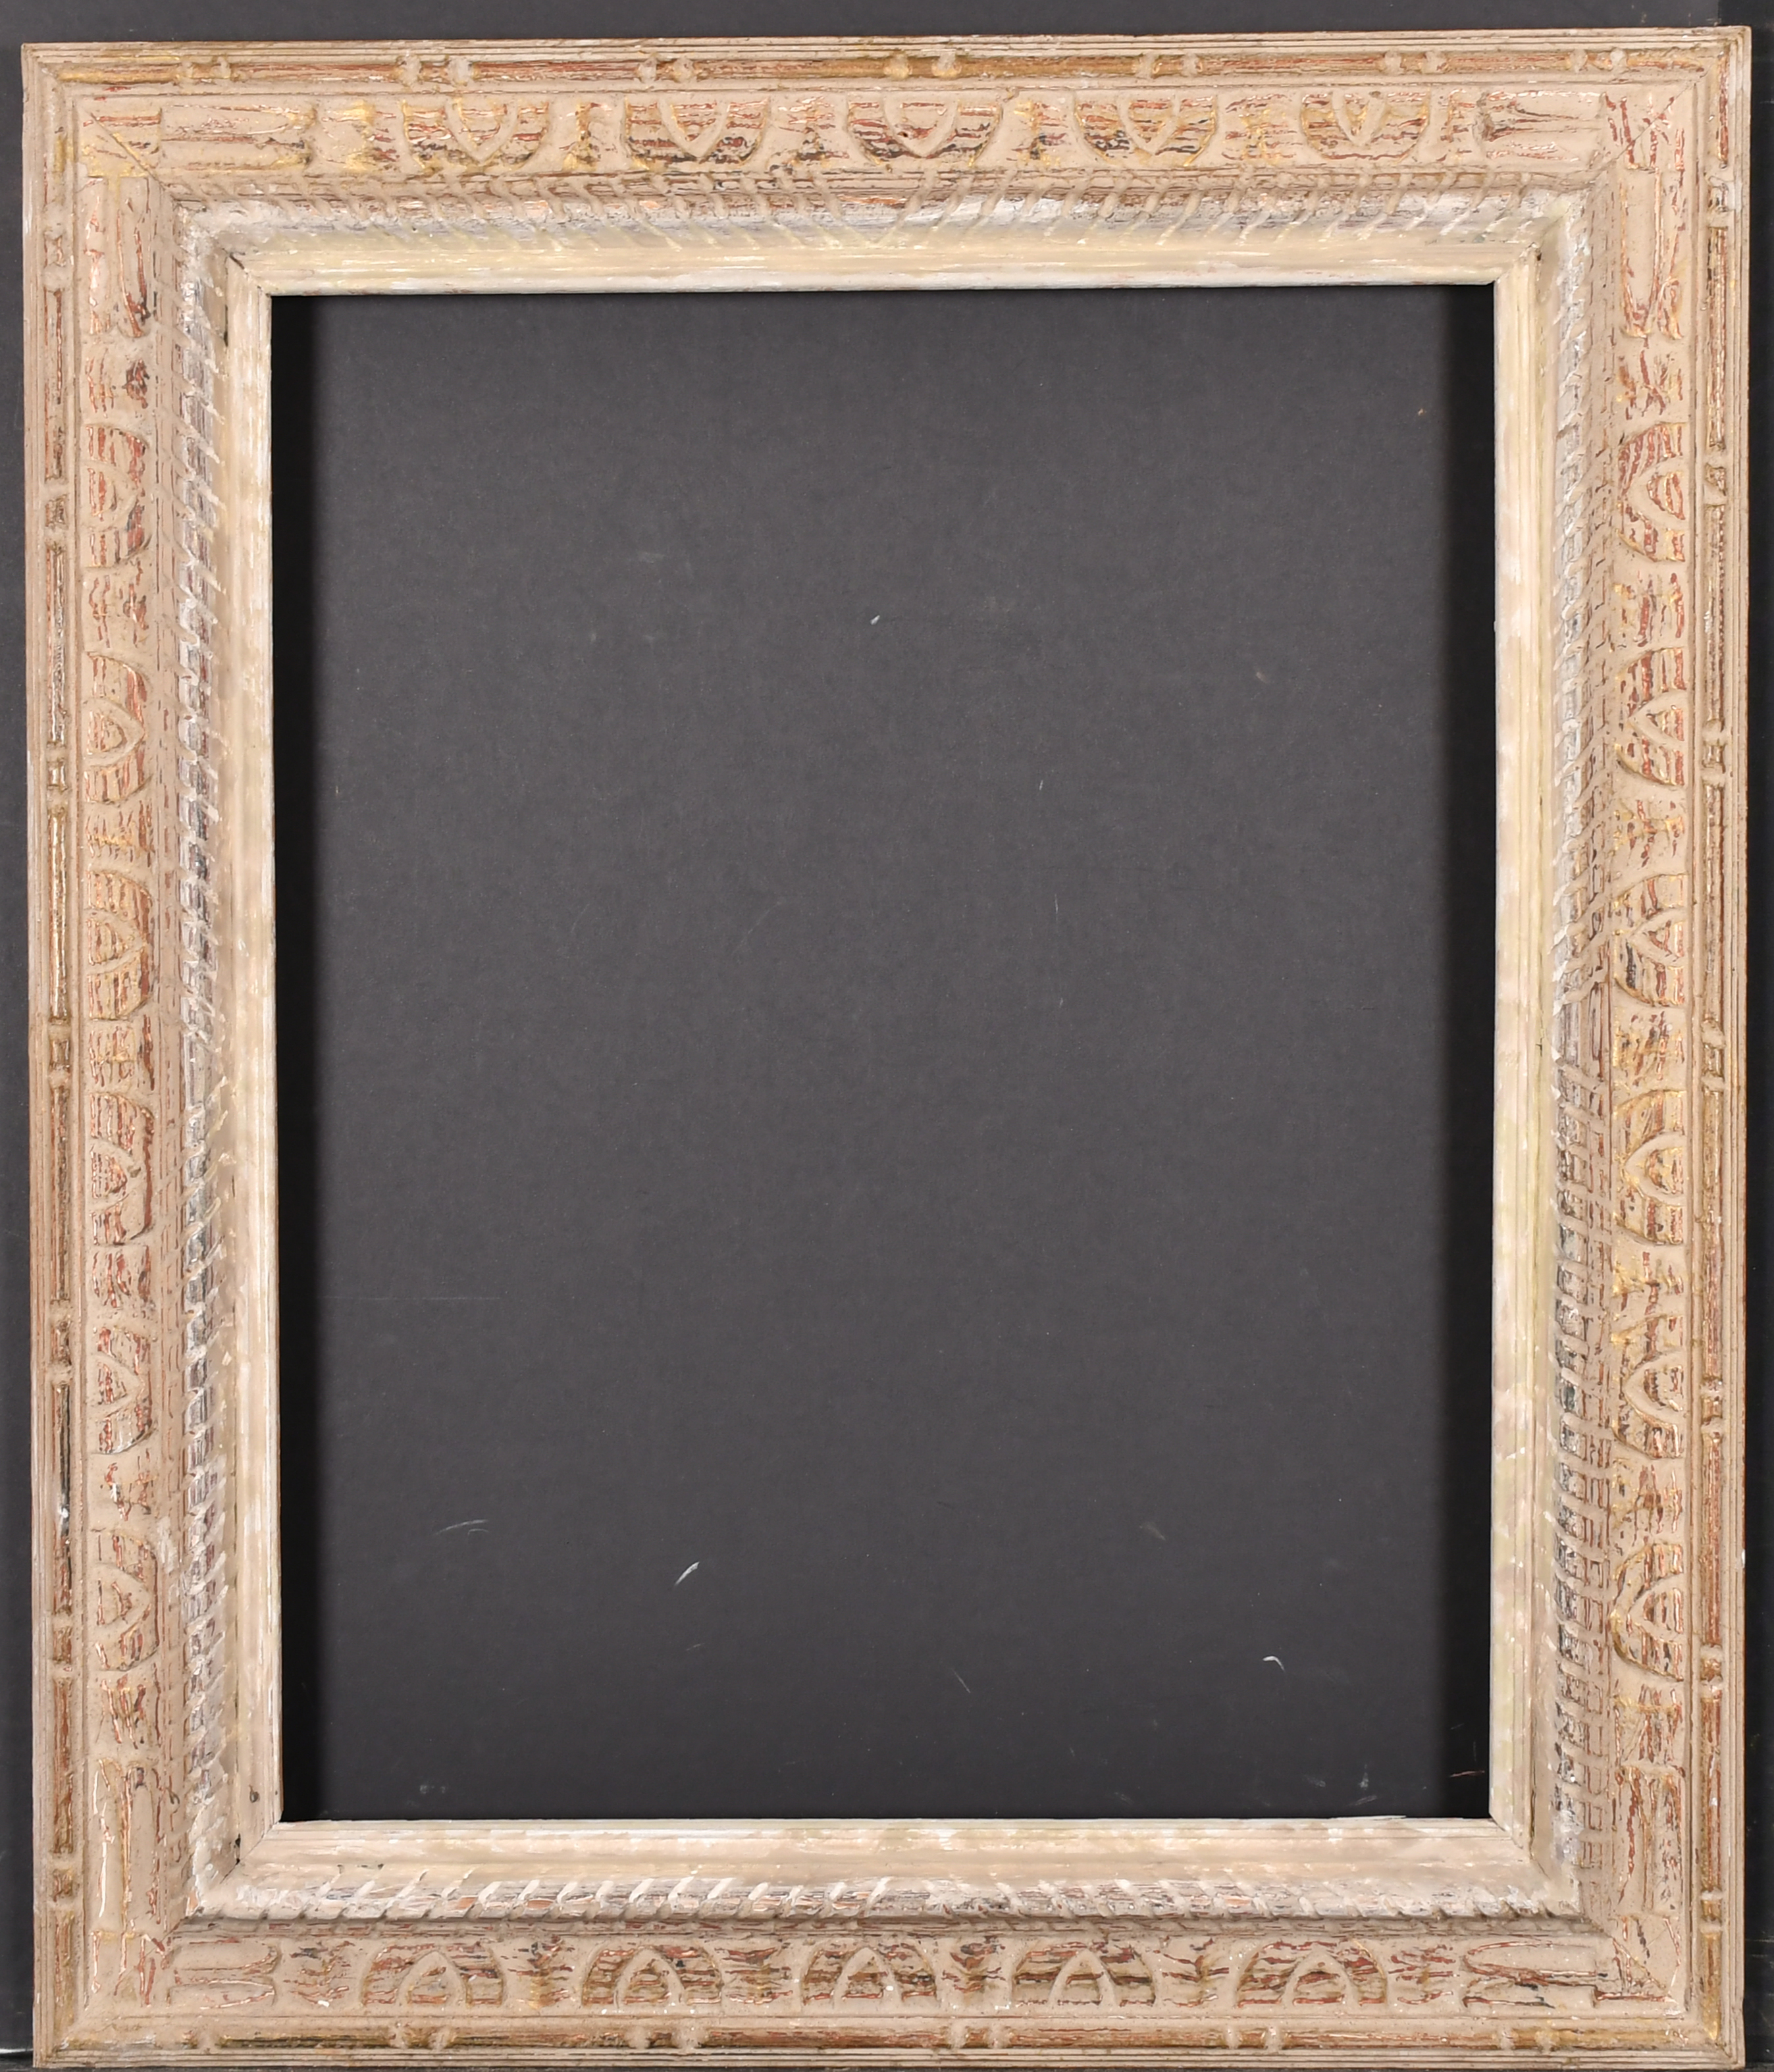 20th Century French School. A Painted Carved Wood Frame, rebate 20.5" x 16.5" (52.1 x 41.9cm) - Image 2 of 3